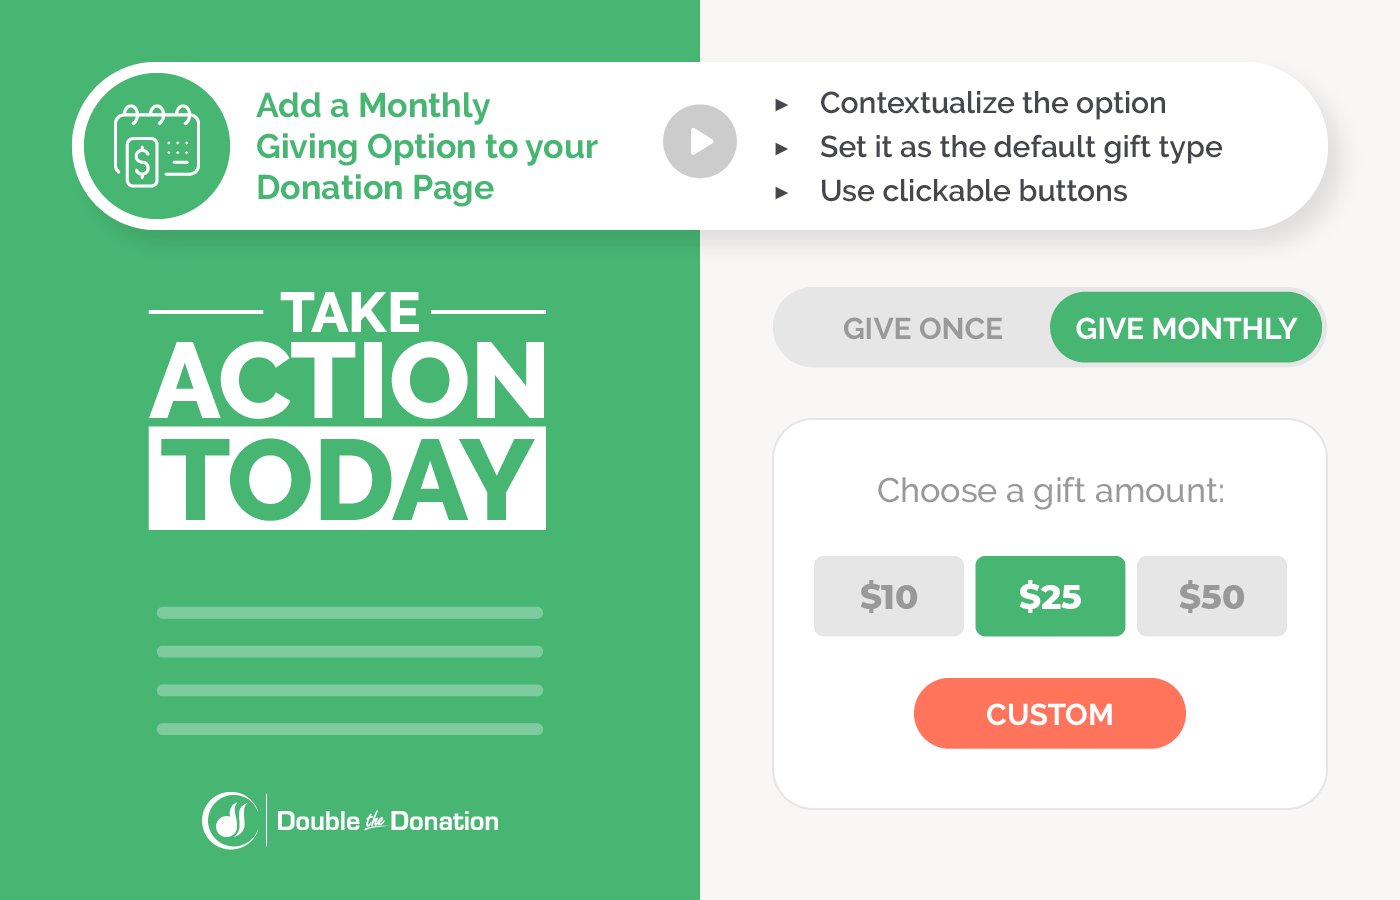 An example of a monthly giving program being promoted on a donation page.